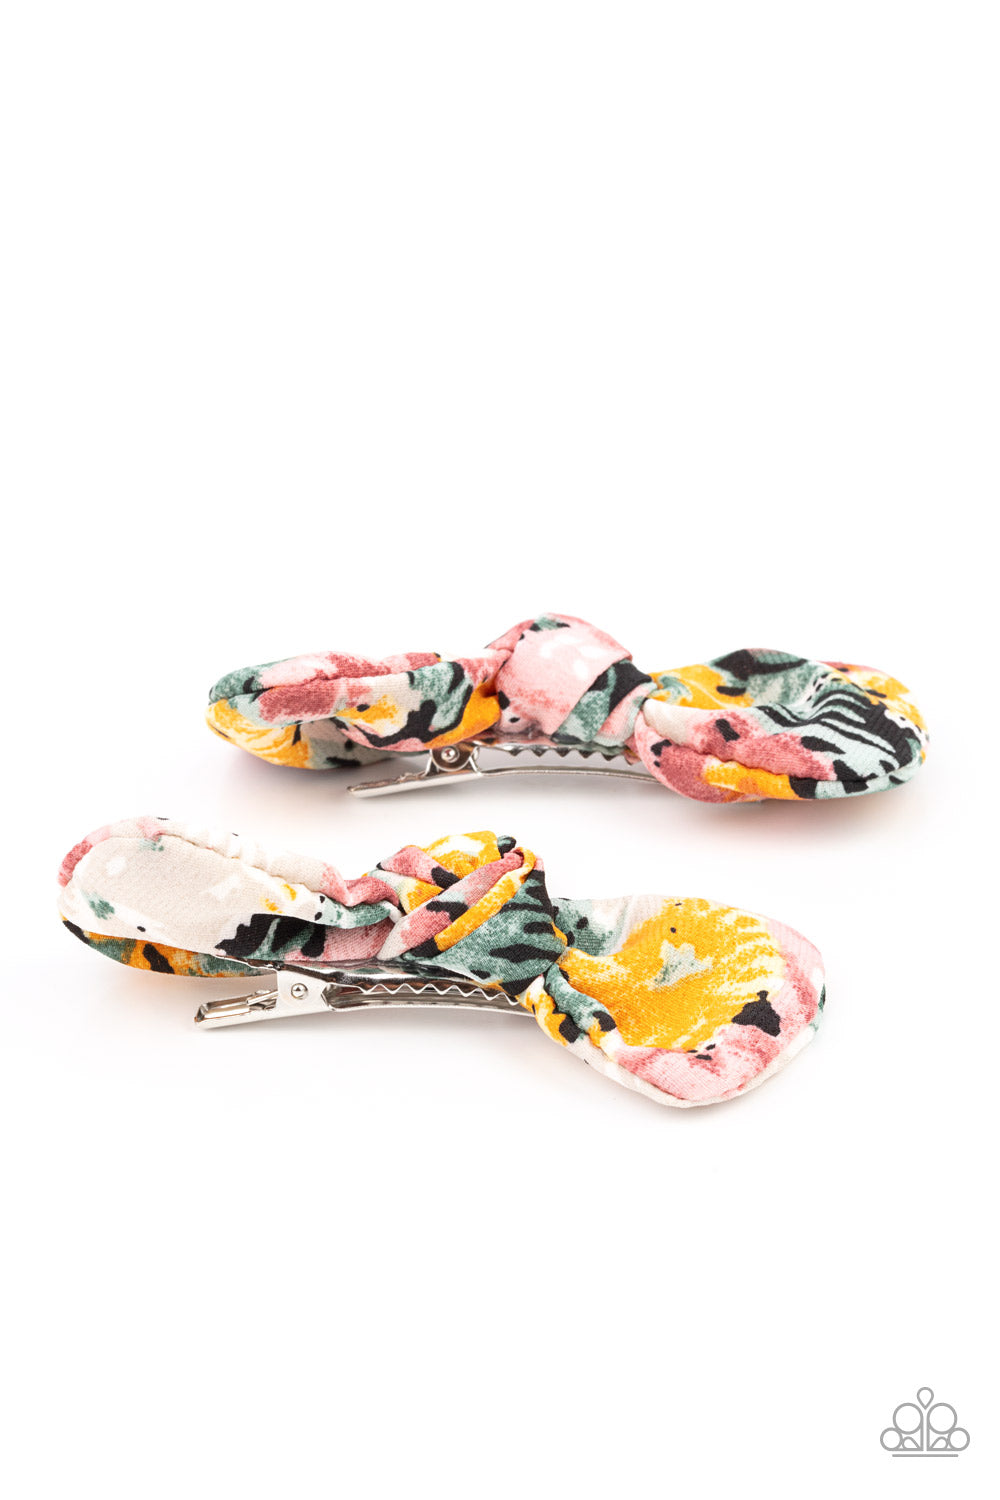 Paparazzi Accessories Pastime Picnic - Multi Featuring hints of yellow, green, pink and gray, colorful pieces of fabric delicately knot into a pair of whimsical hair bows for a seasonal look. Features standard hair clips on the back. Featured inside The P